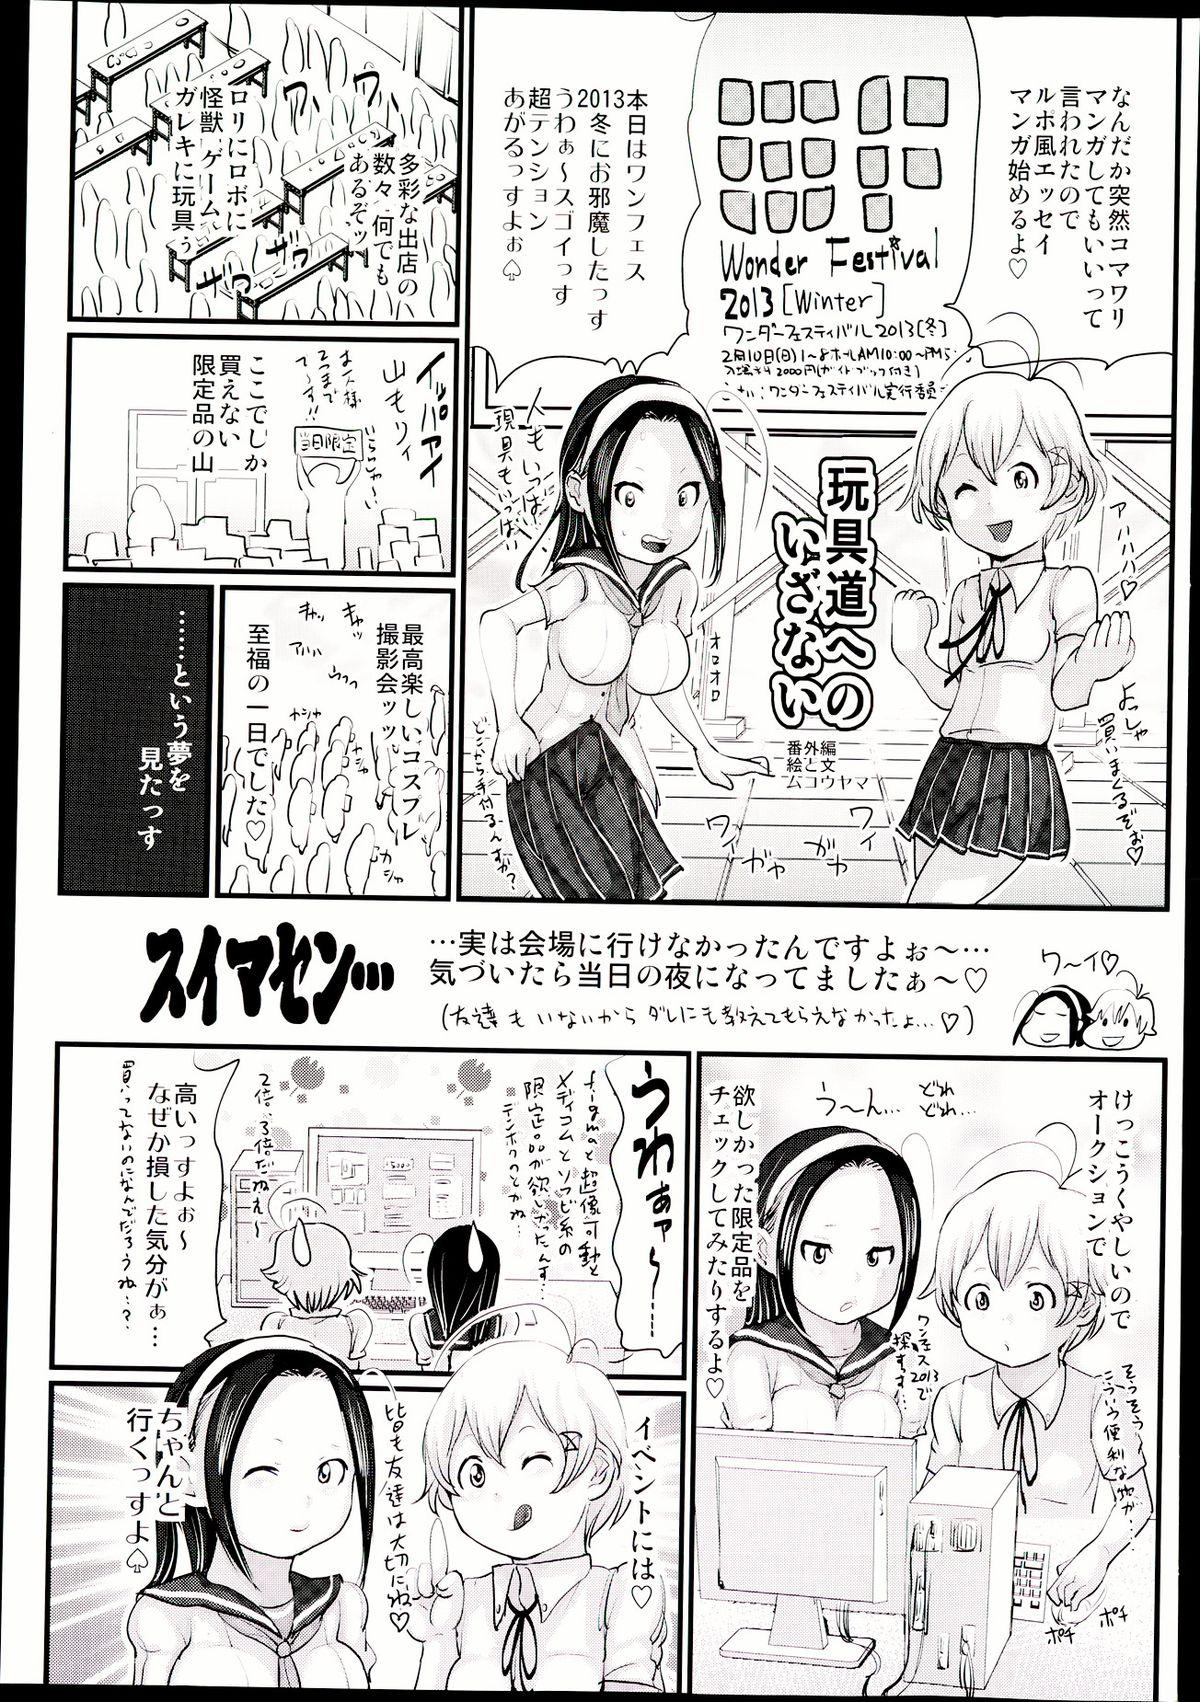 Latex COMIC Maihime Musou Act. 05 2013-05 Wives - Page 395